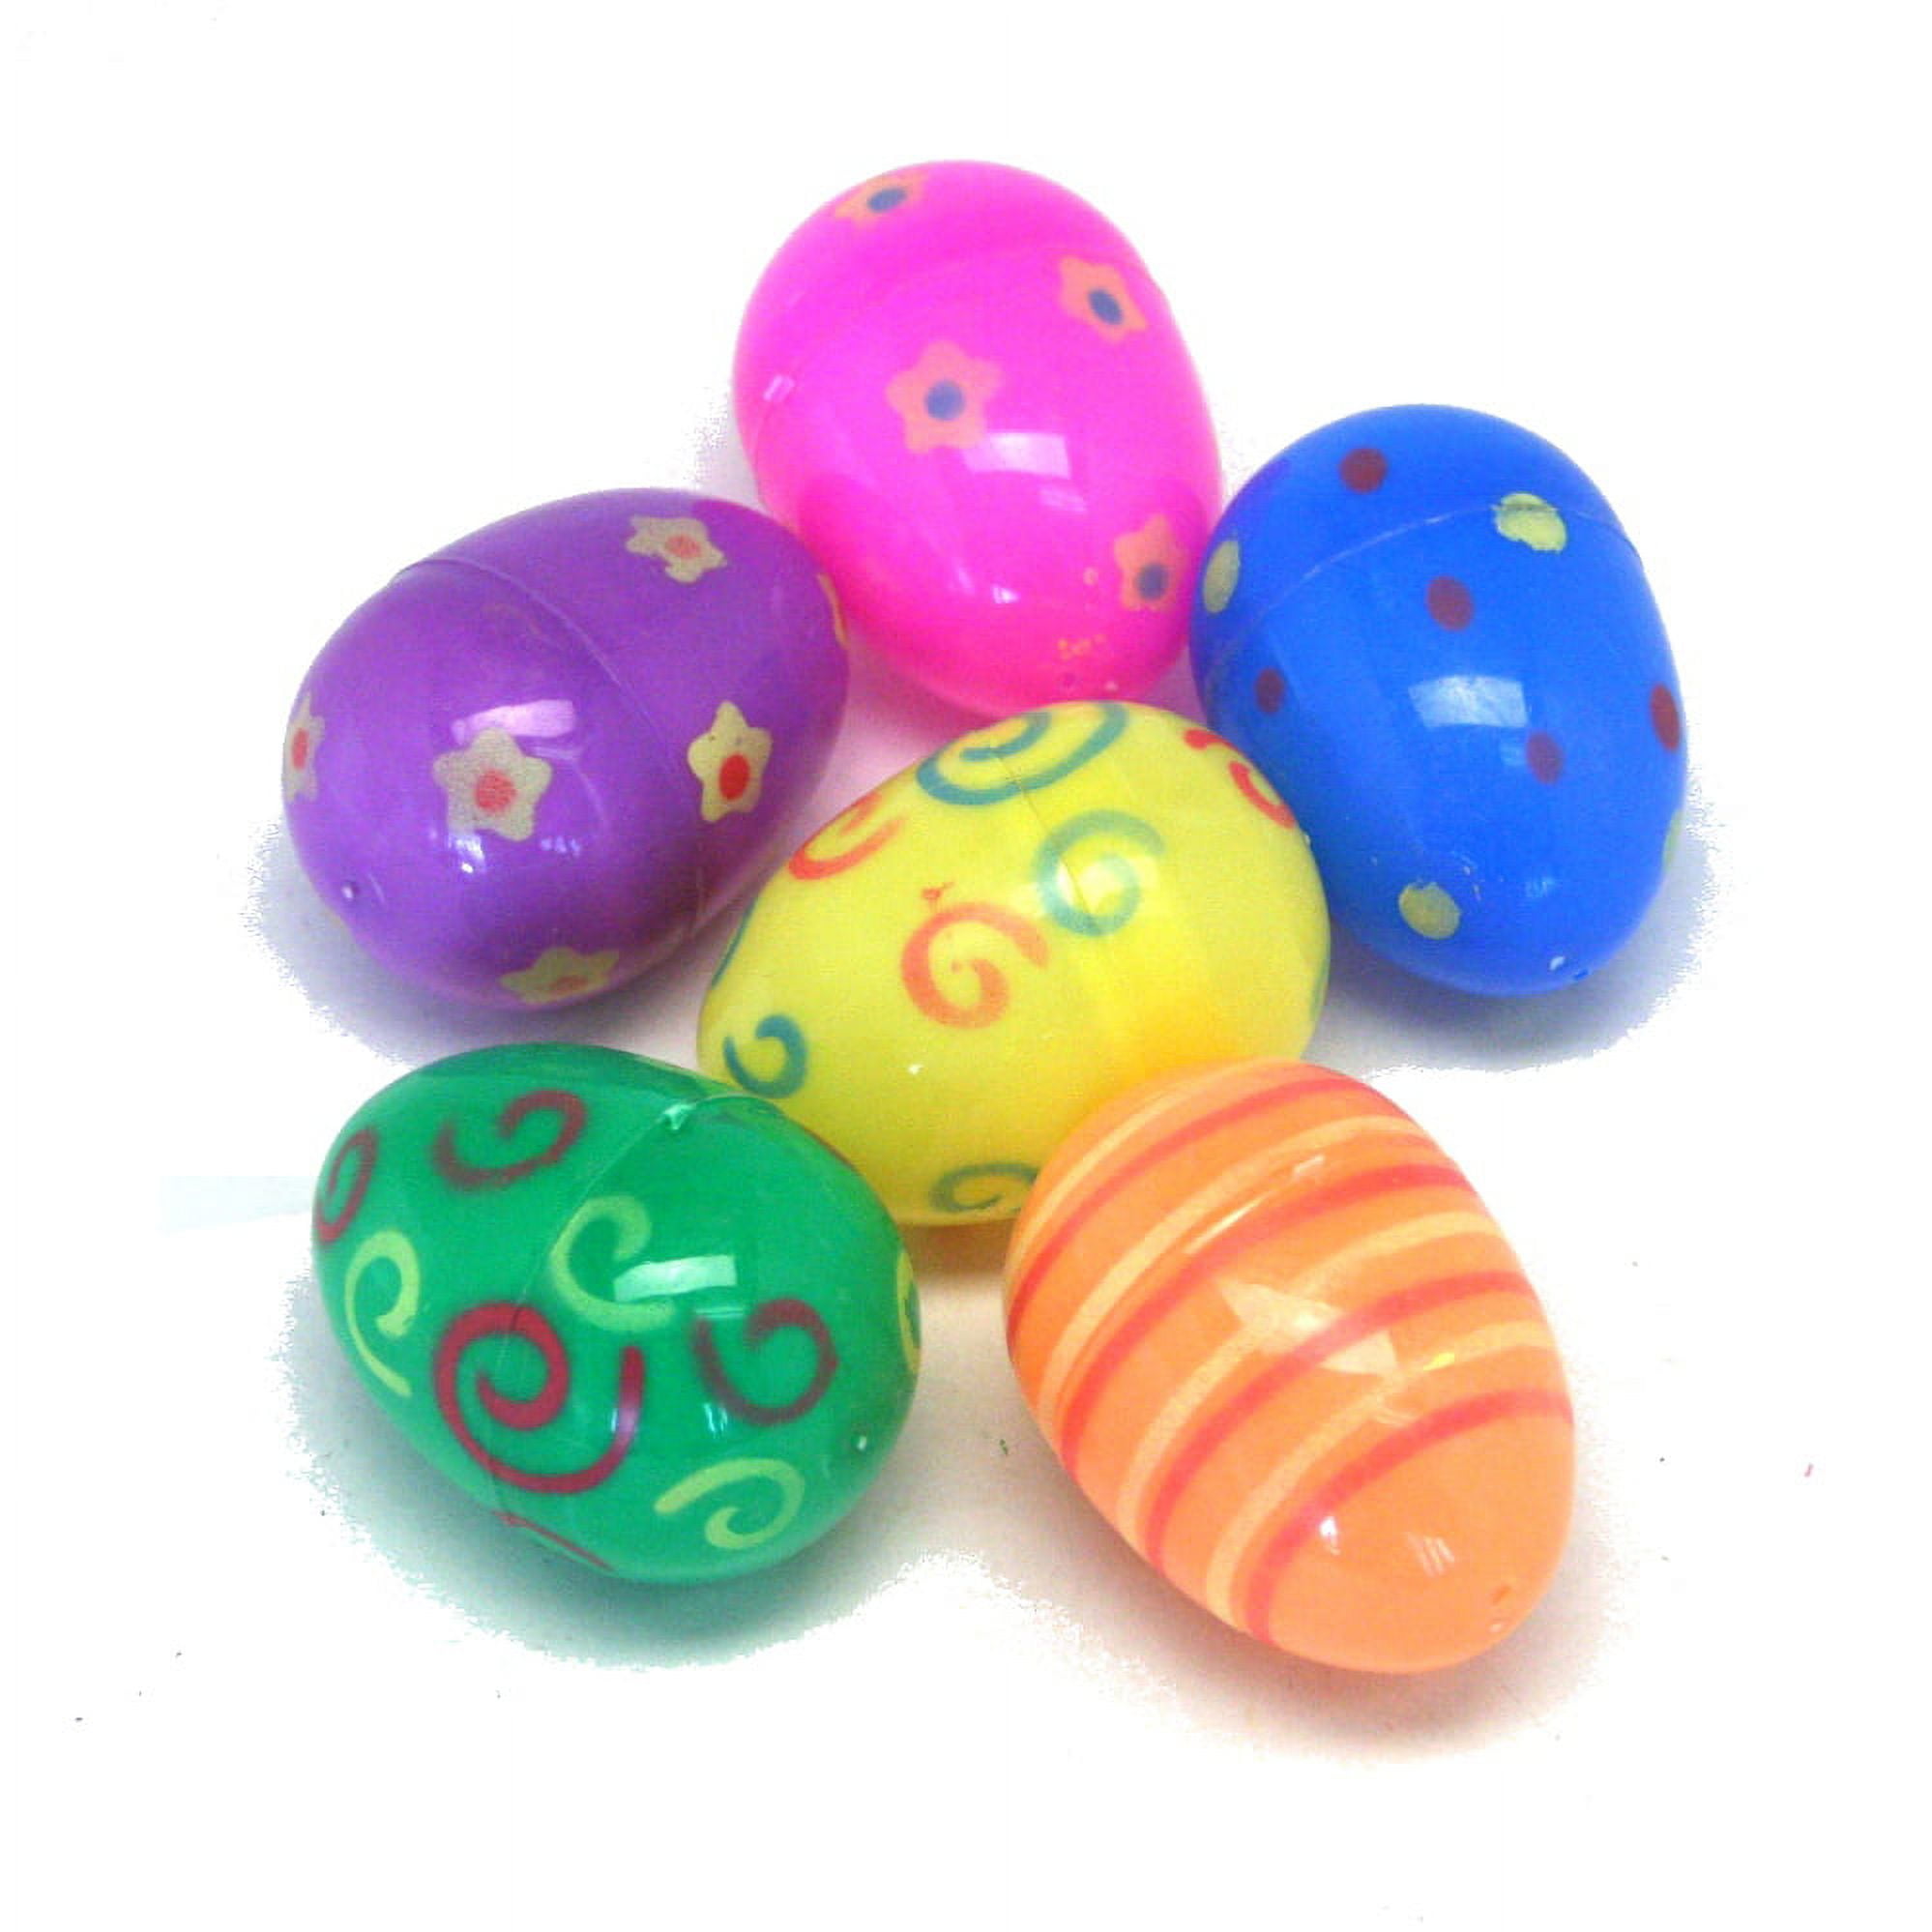 12 Pack Easter Egg Ornaments Paint Craft For Kids- Easter Basket Fillers,  Party Favors, Painting Eggs Easter Gift 